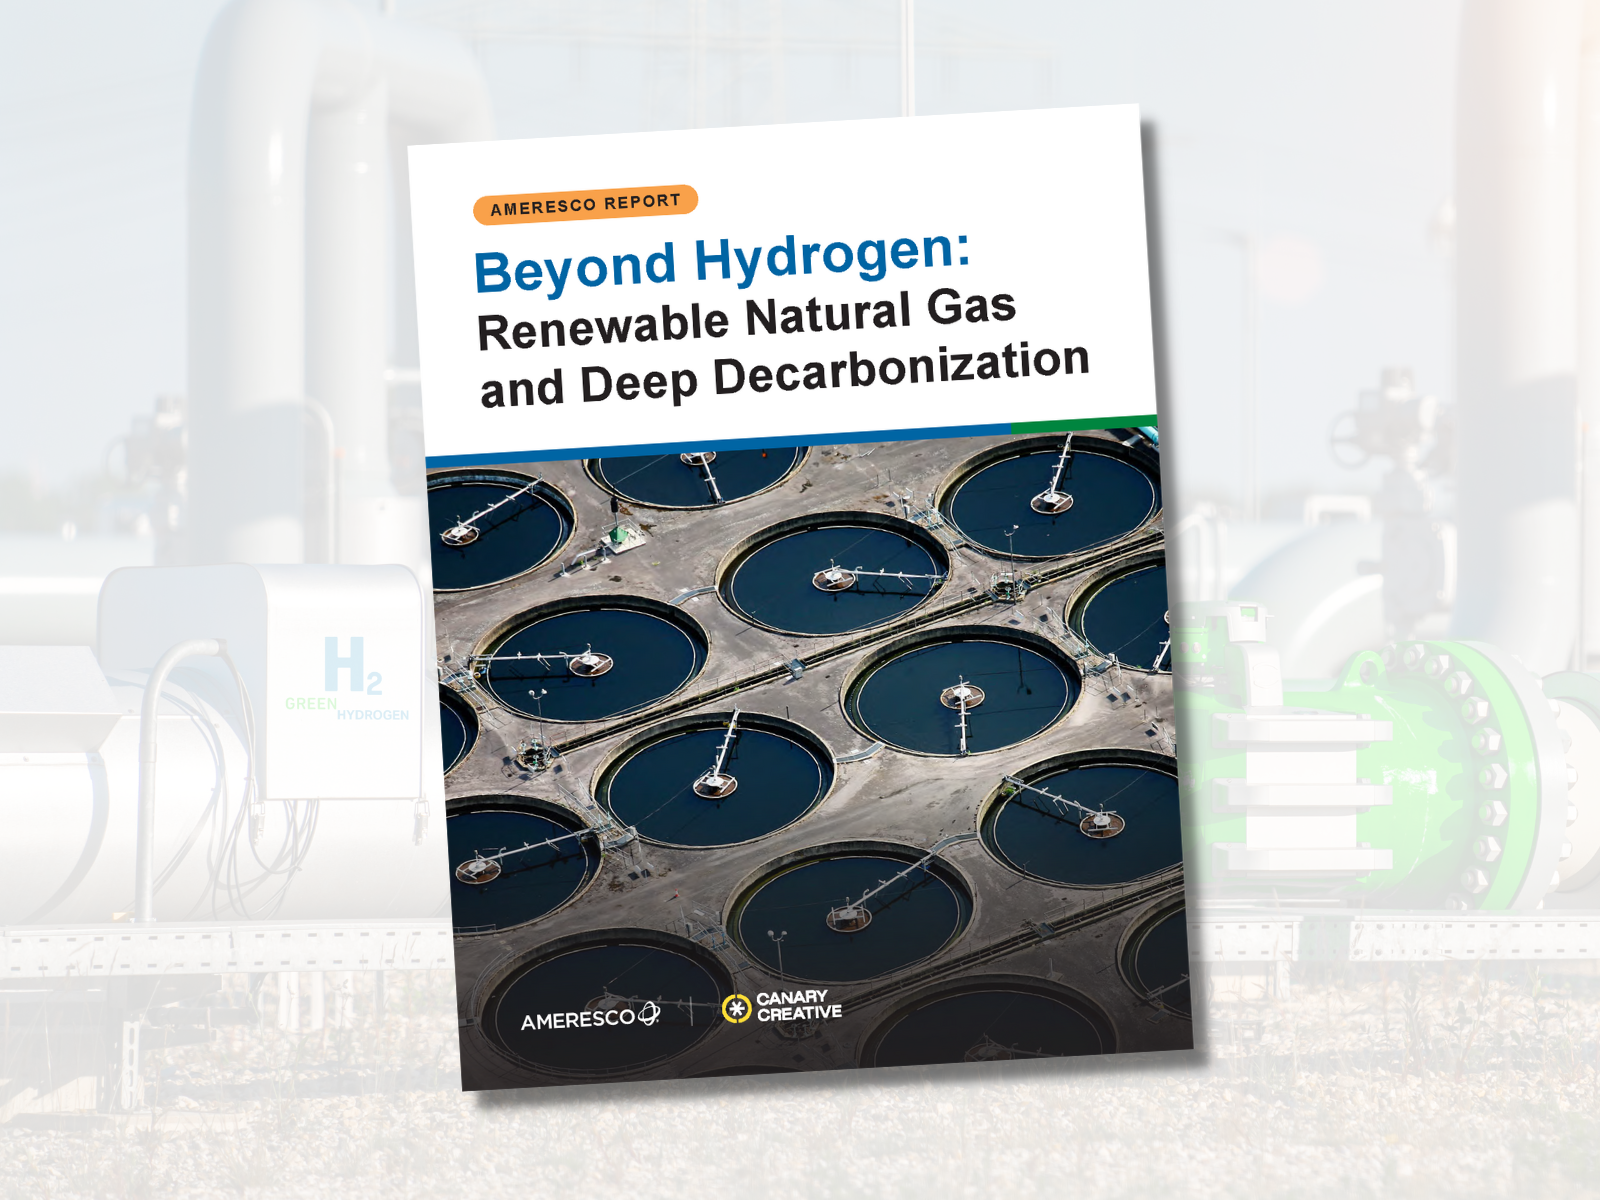 Alternative Clean Fuels for Decarbonization:  Renewable Natural Gas (RNG) & Green Hydrogen